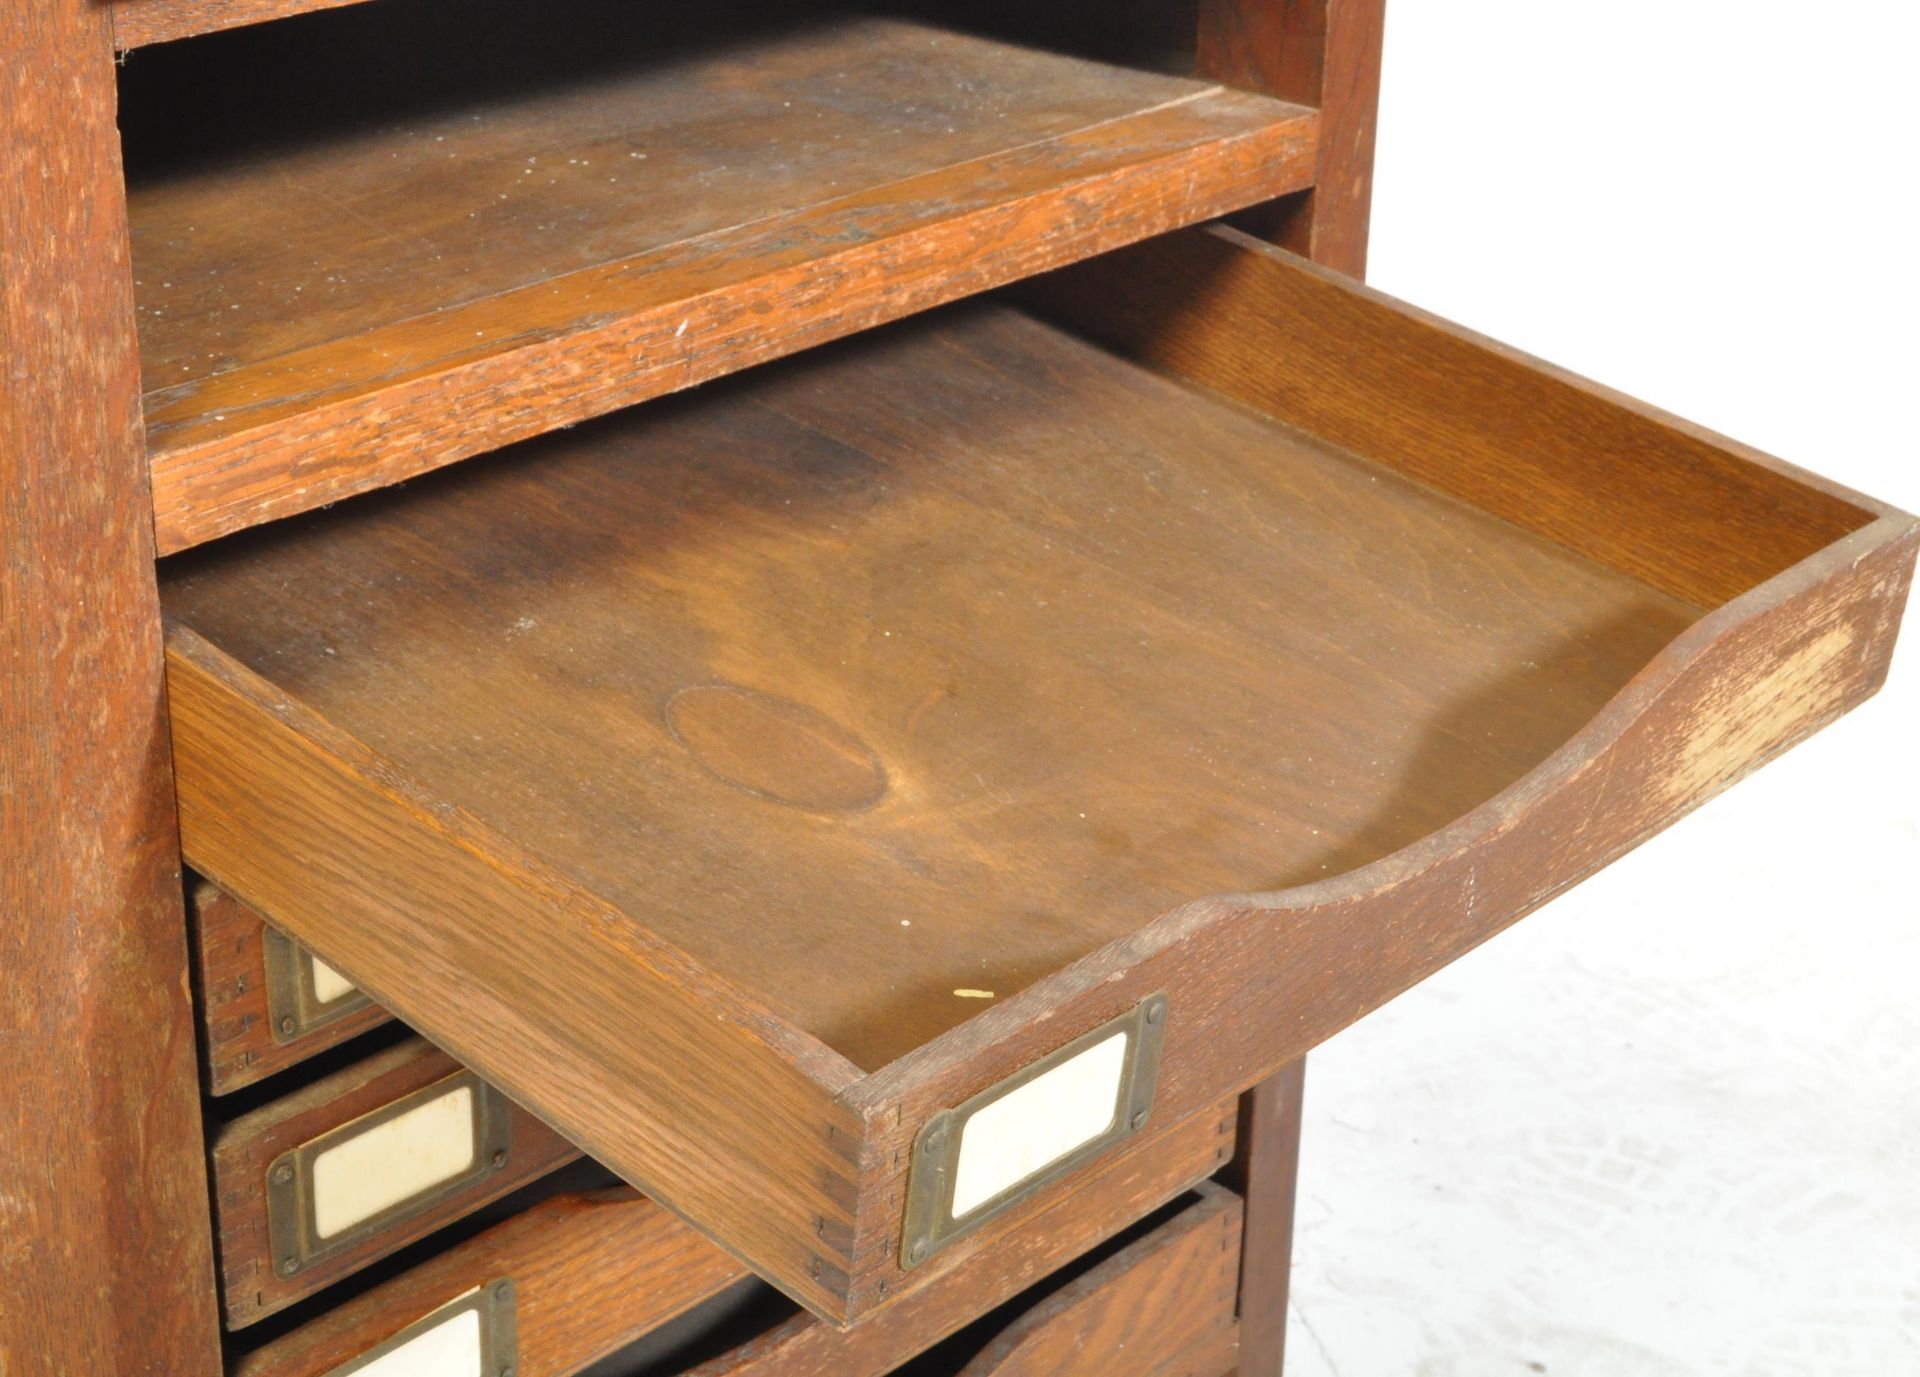 ASTROLA - EARLY 20TH CENTURY OAK OFFICE FILING CABINET - Image 5 of 6